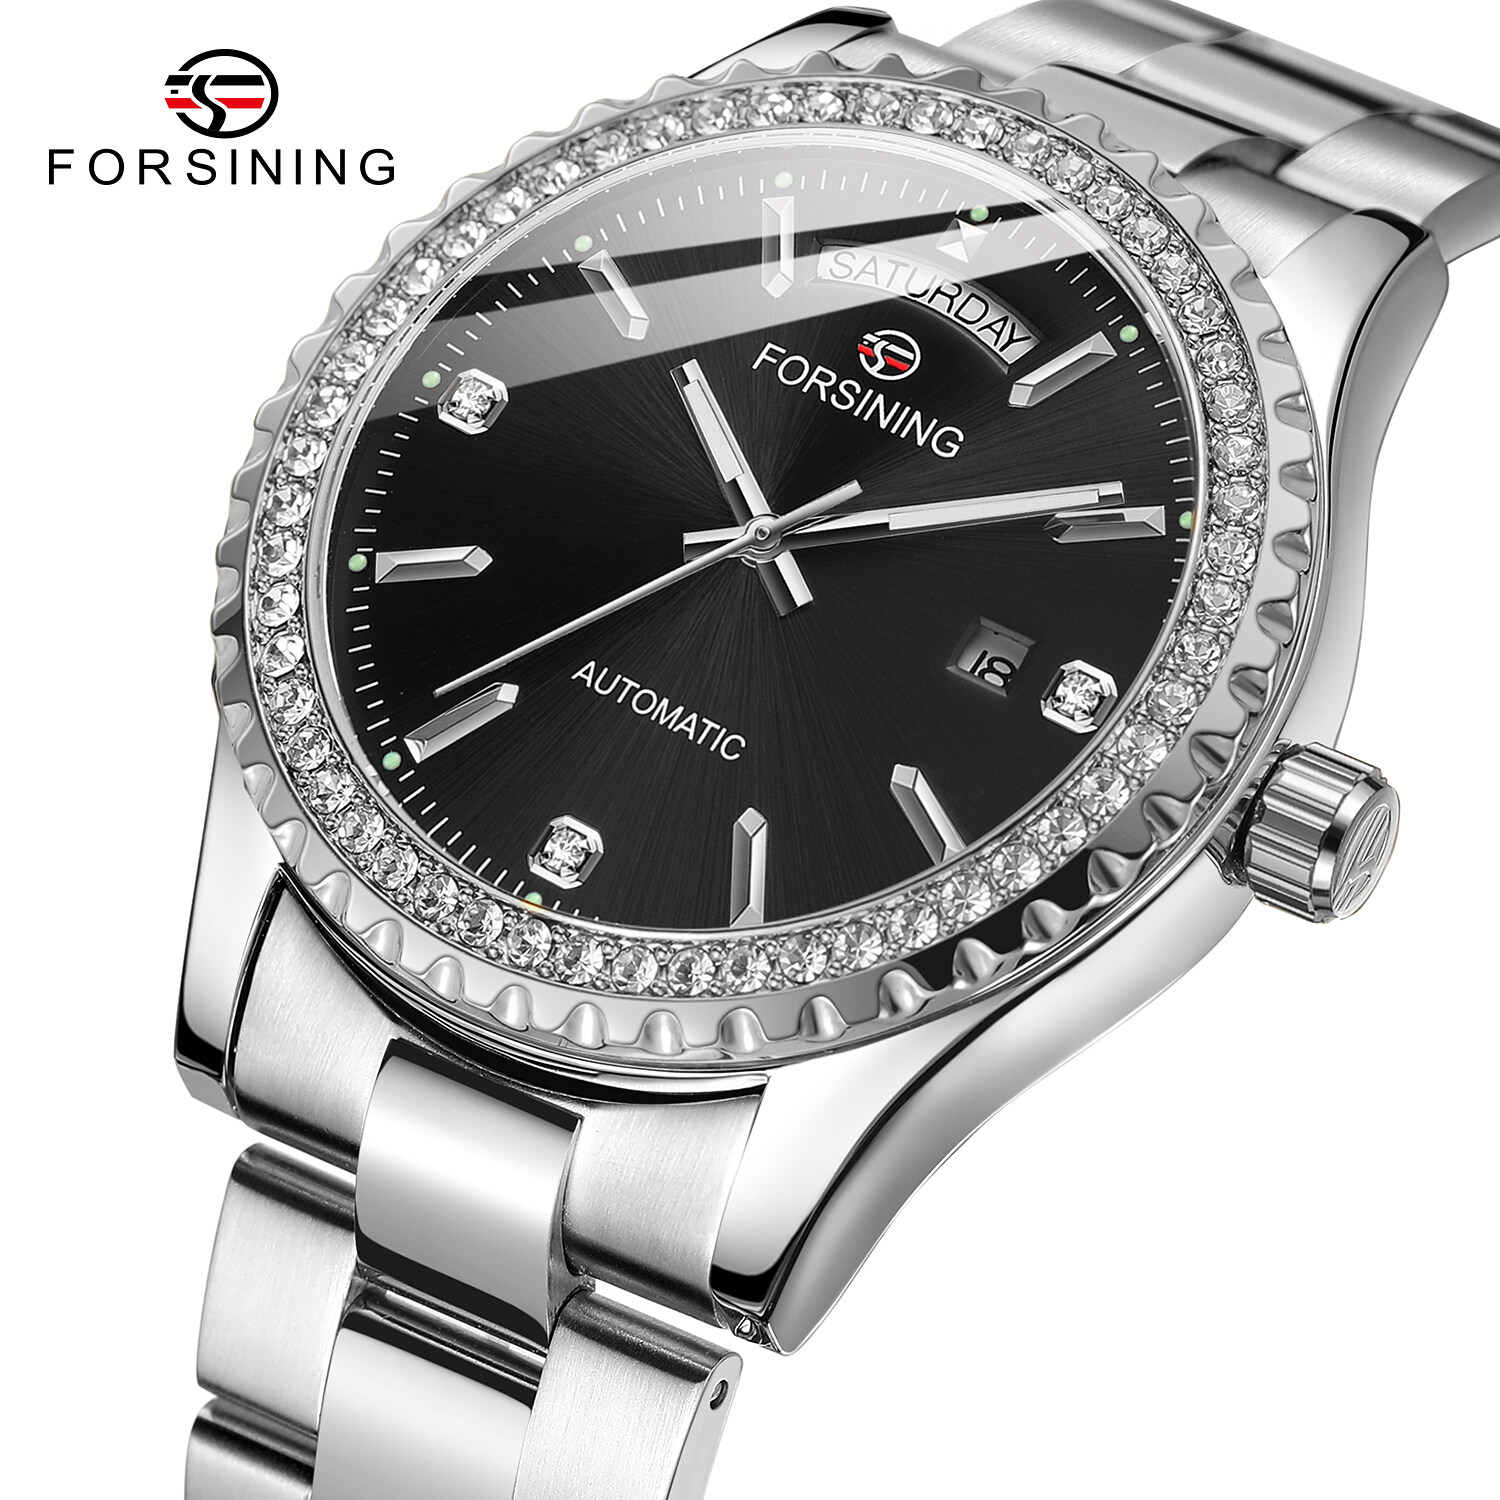 Forsining Automatic Watch Fashion Luxury Men s Stainless Steel Strap